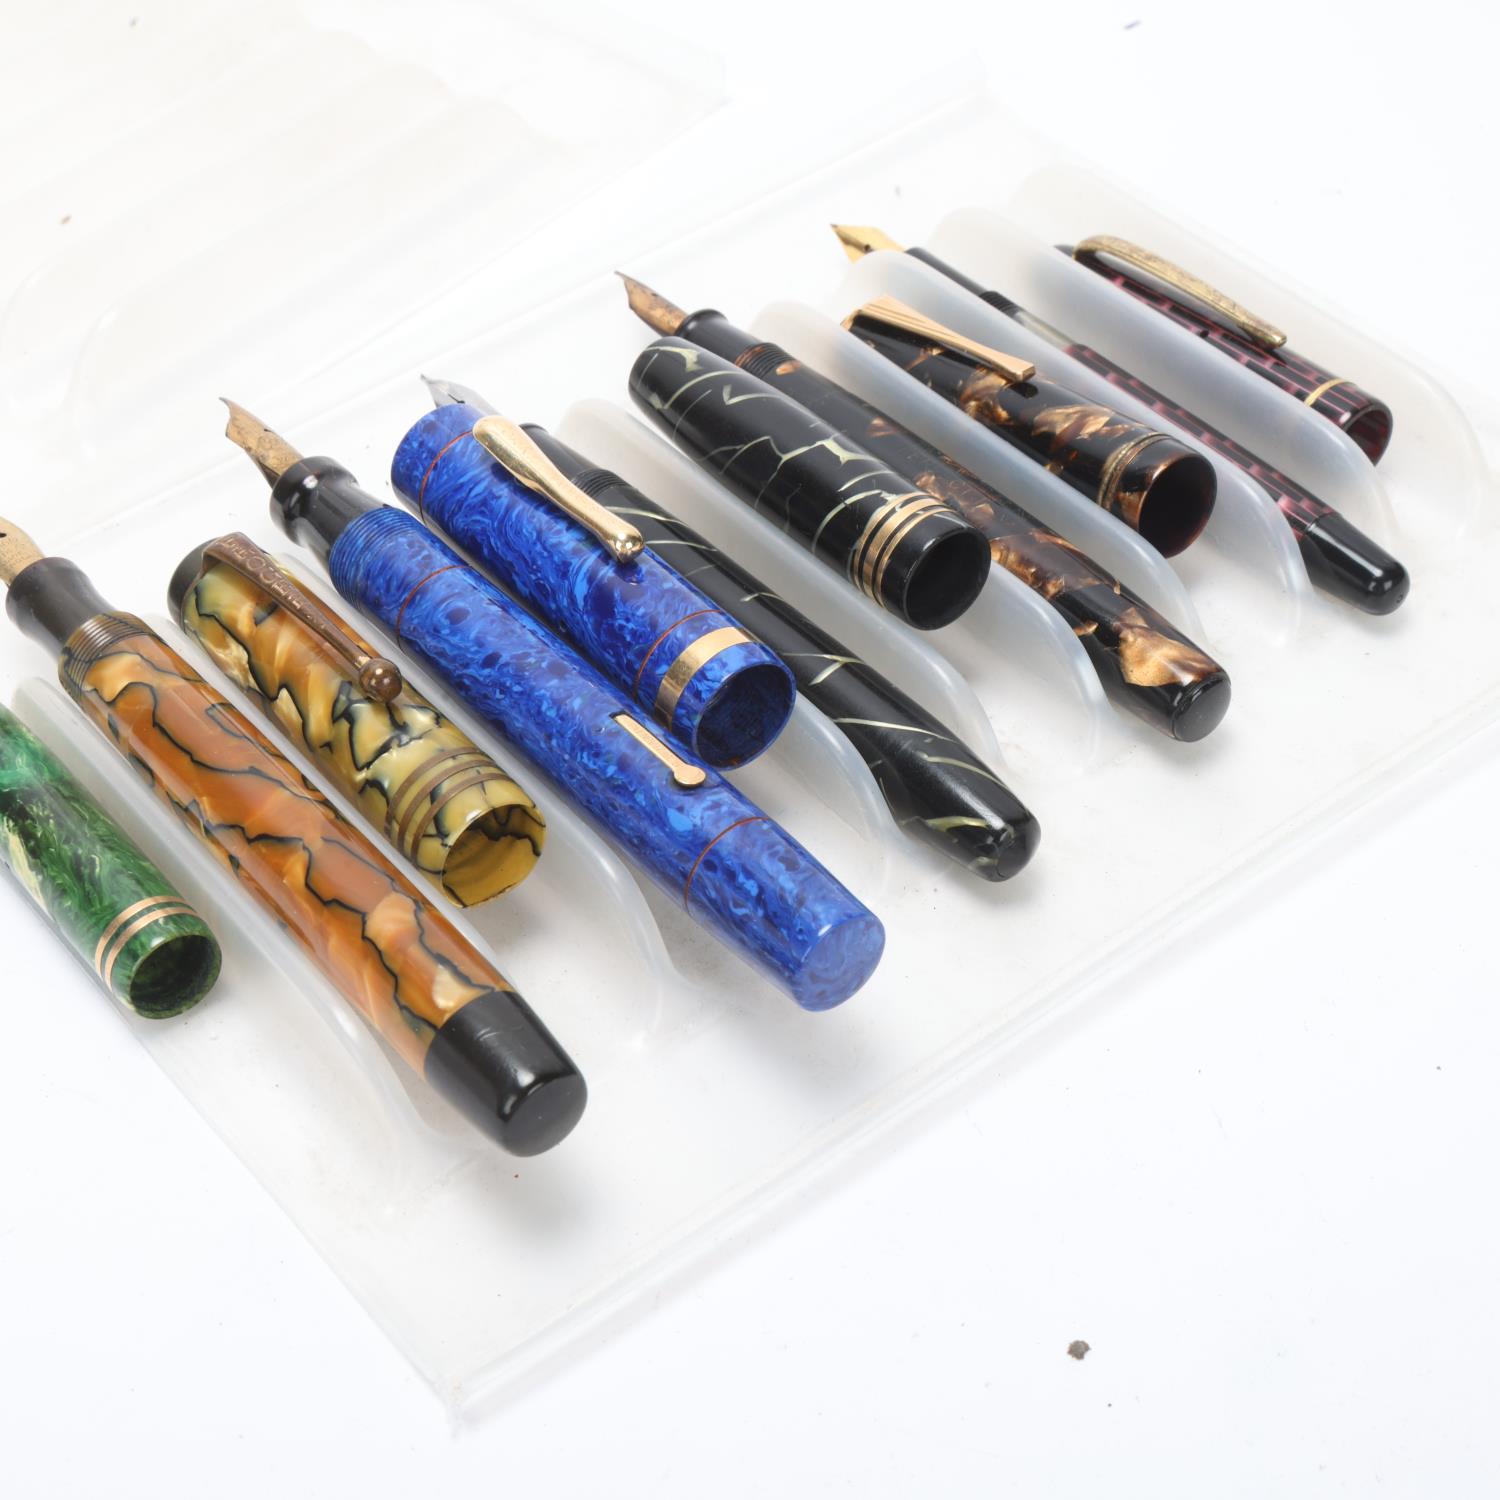 6 vintage fountain pens, including Conway Stewart 58, Parker Duofold, Progress, Wyvern Perfect No - Image 4 of 4